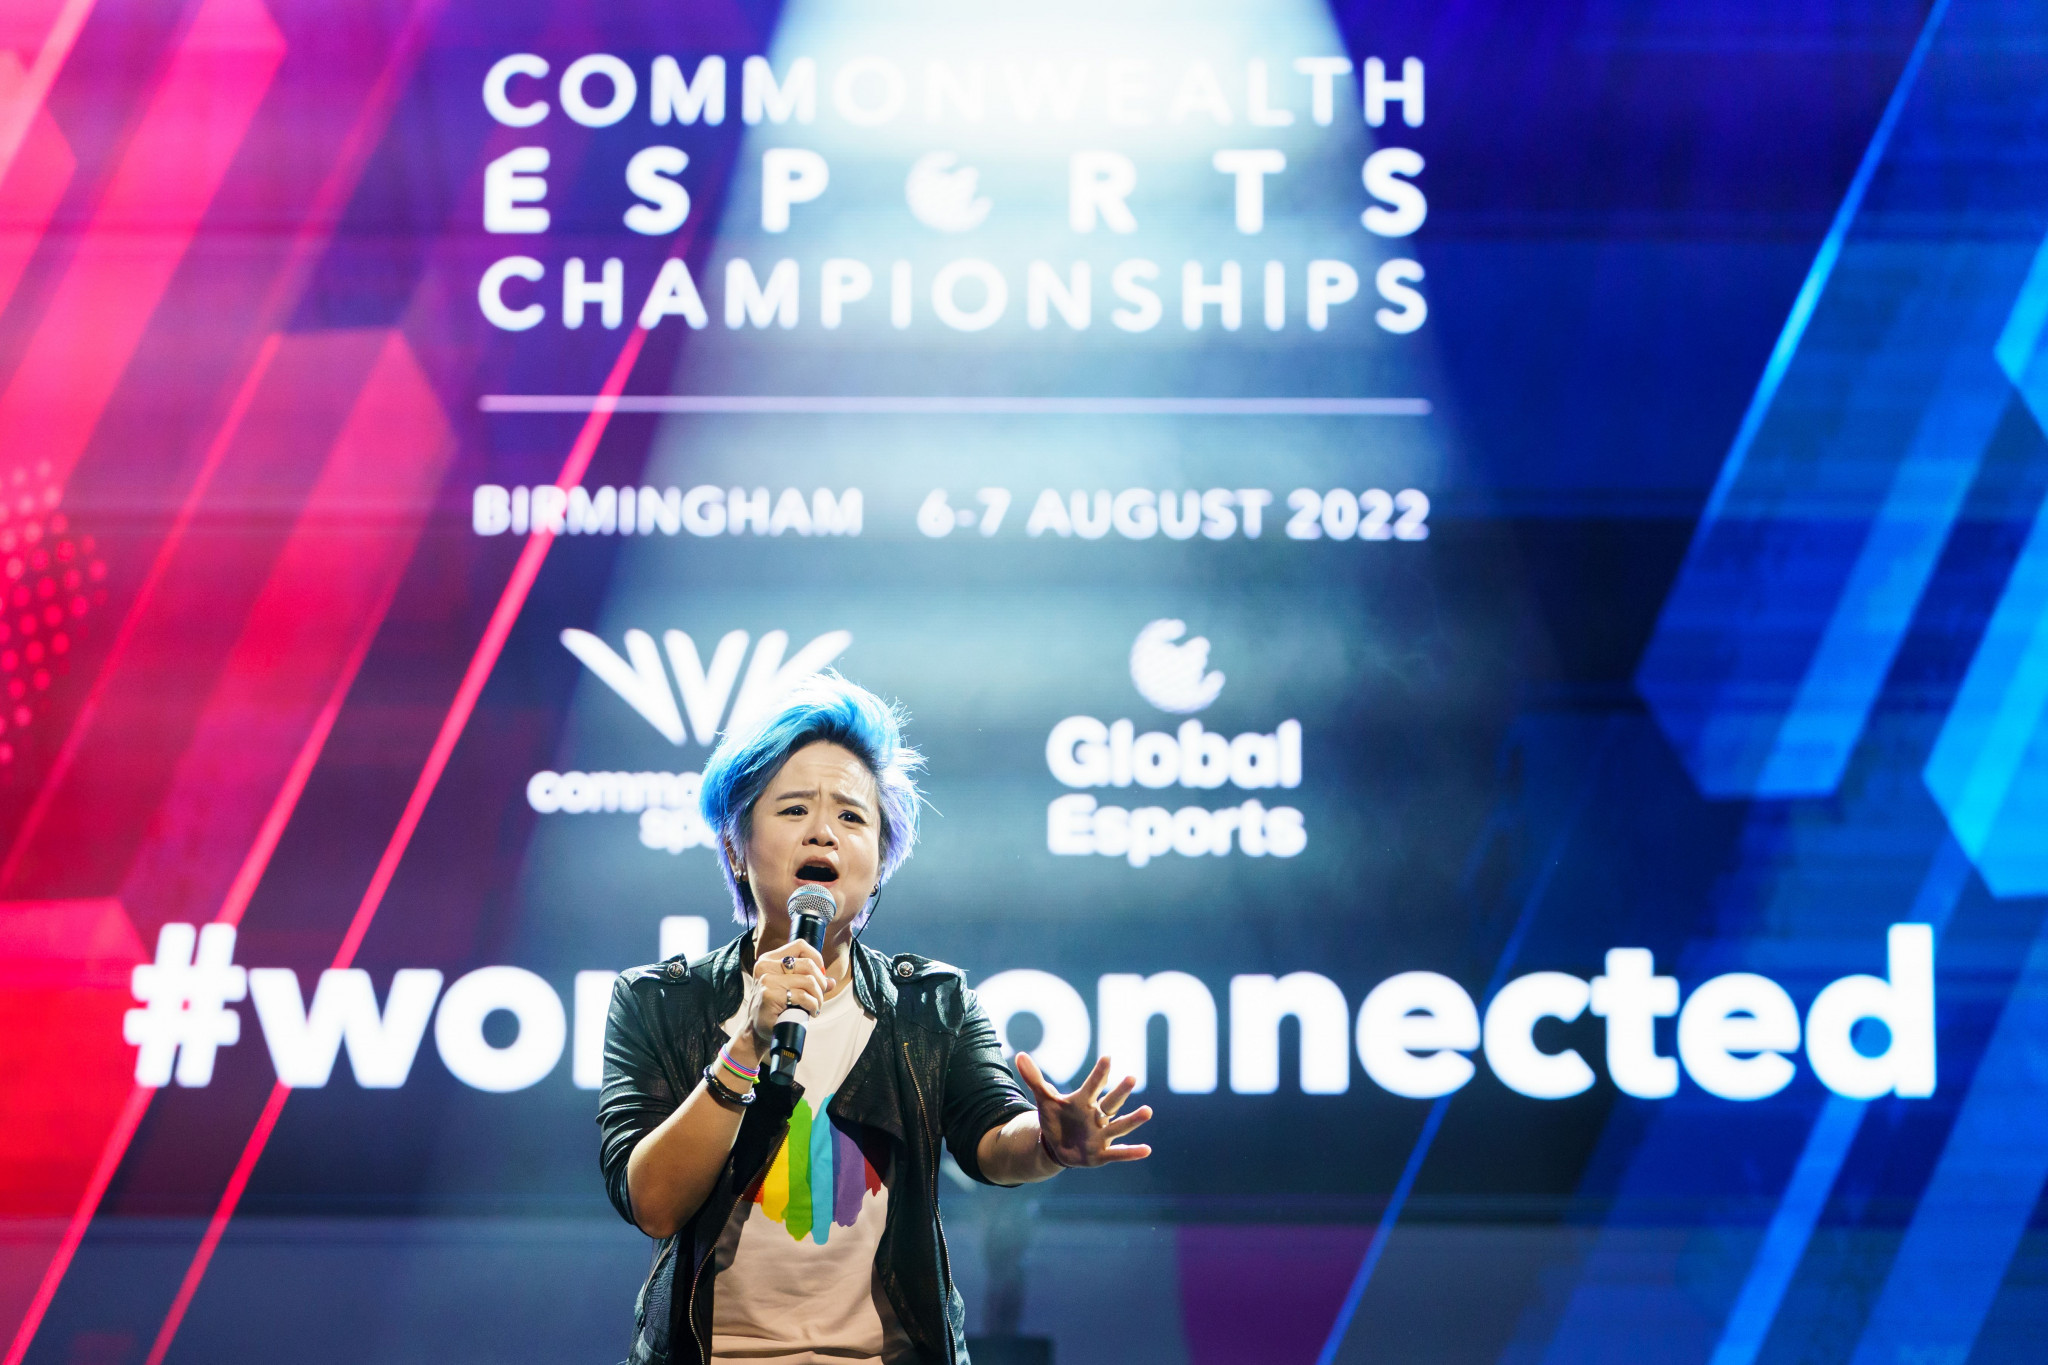 Jill Marie-Thomas performed the Global Esports Federation's anthem ©GEF